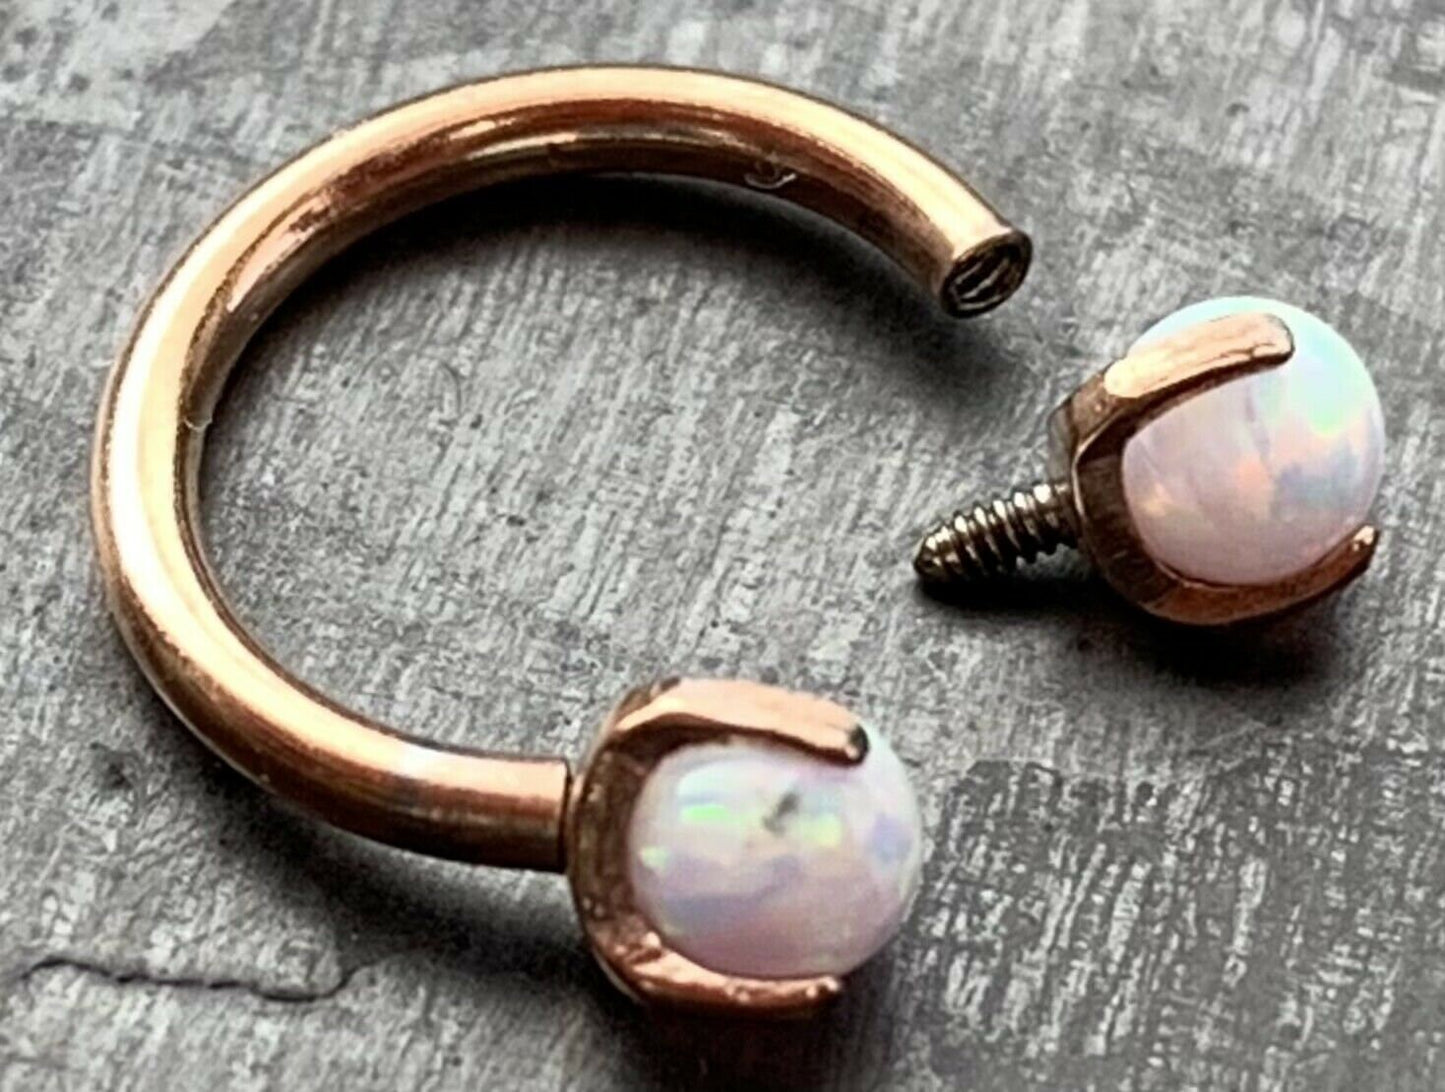 1 Piece of Claw Set Opal Balls Circular Horseshoe Septum Ring - 16g - 8mm - Steel Pink, Blue or White, Black, Gold, Rose Gold Available!